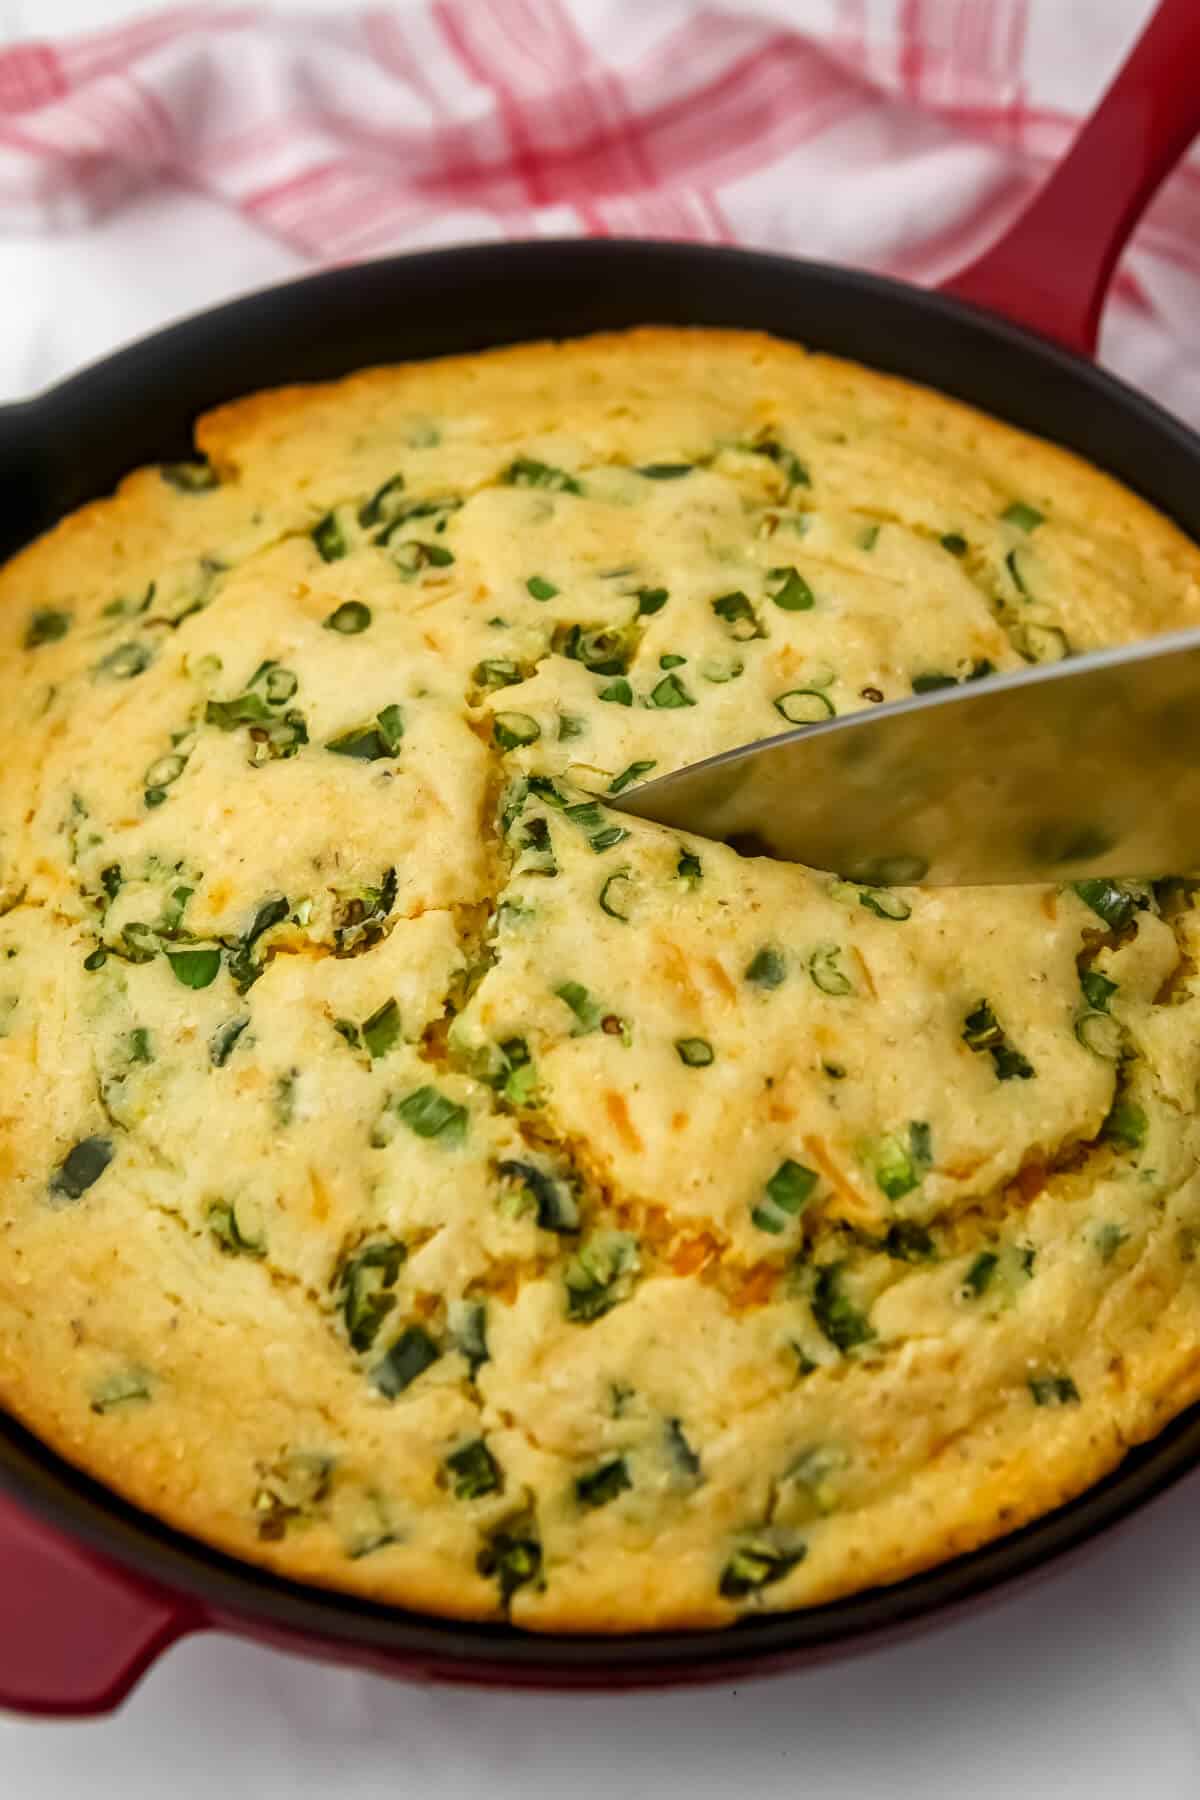 Someone cutting dairy free jalapeno cornbread  with a knife after it has cooled.